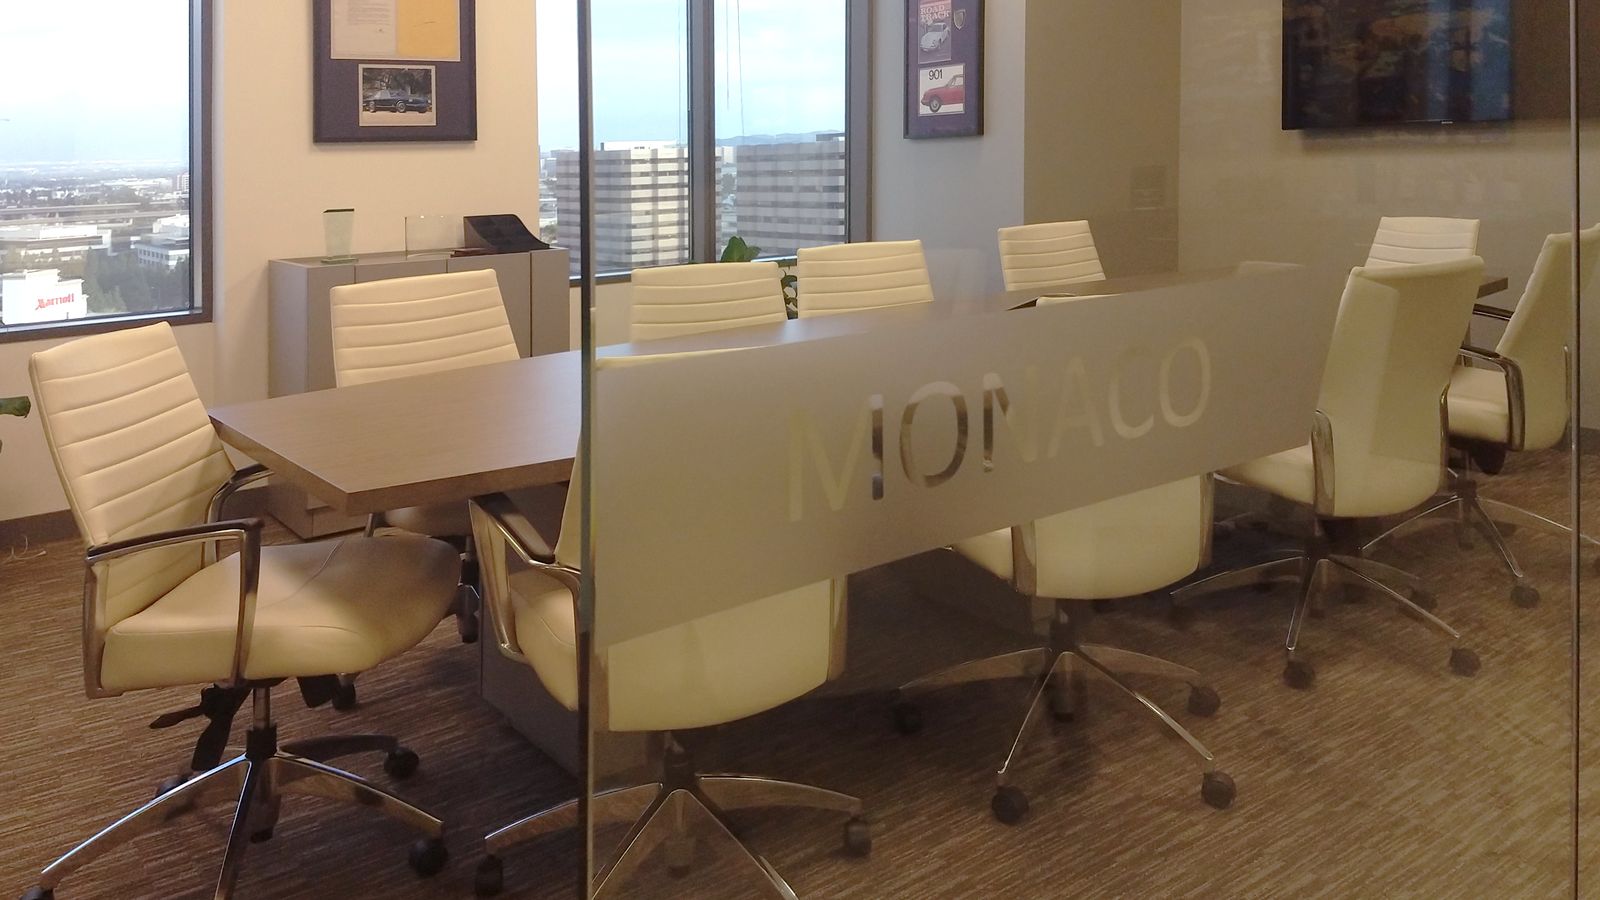 custom indoor sign with the word Monaco on the window made of frosted vinyl for privacy